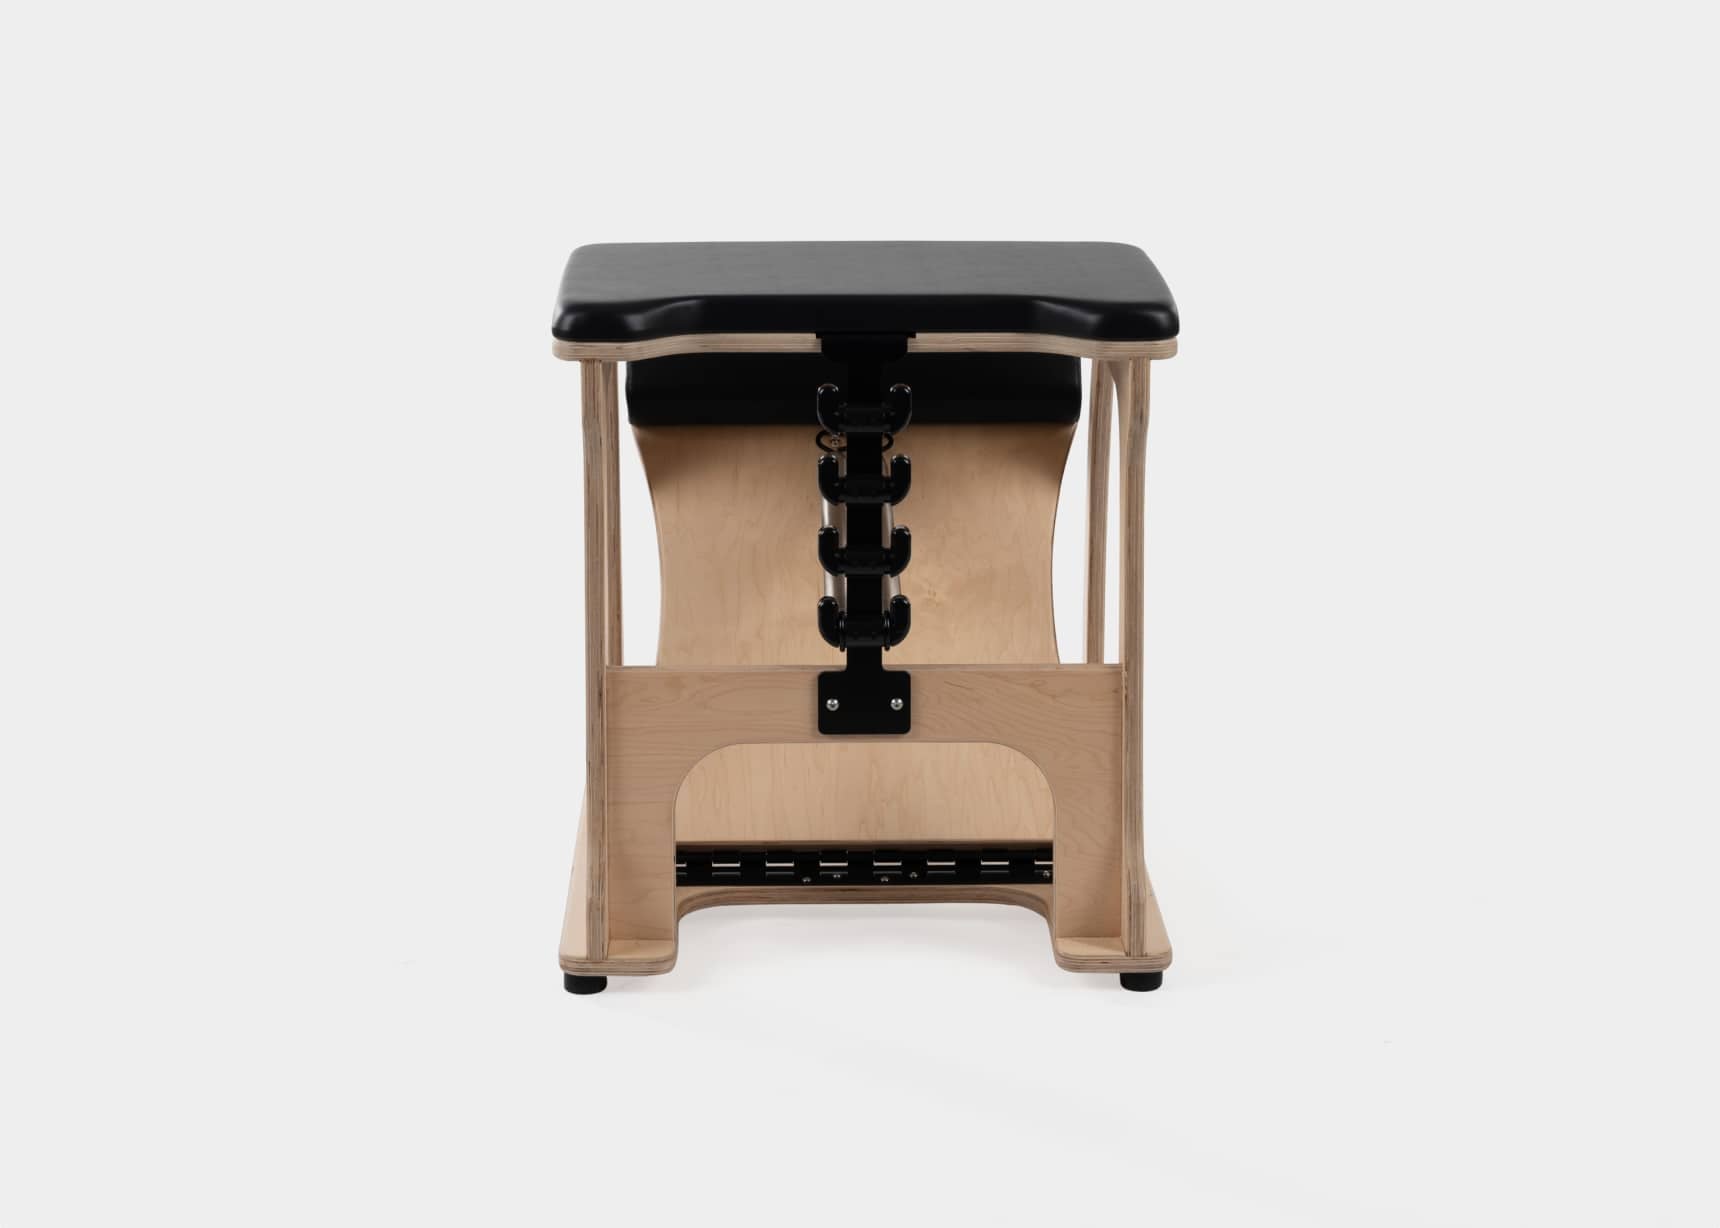 Balanced Body, Inc. - The Balanced Body EXO® chair provides a complete  workout in a small footprint. The lightweight design and the added Slastix™  resistance tubes make the EXO Chair ideal for